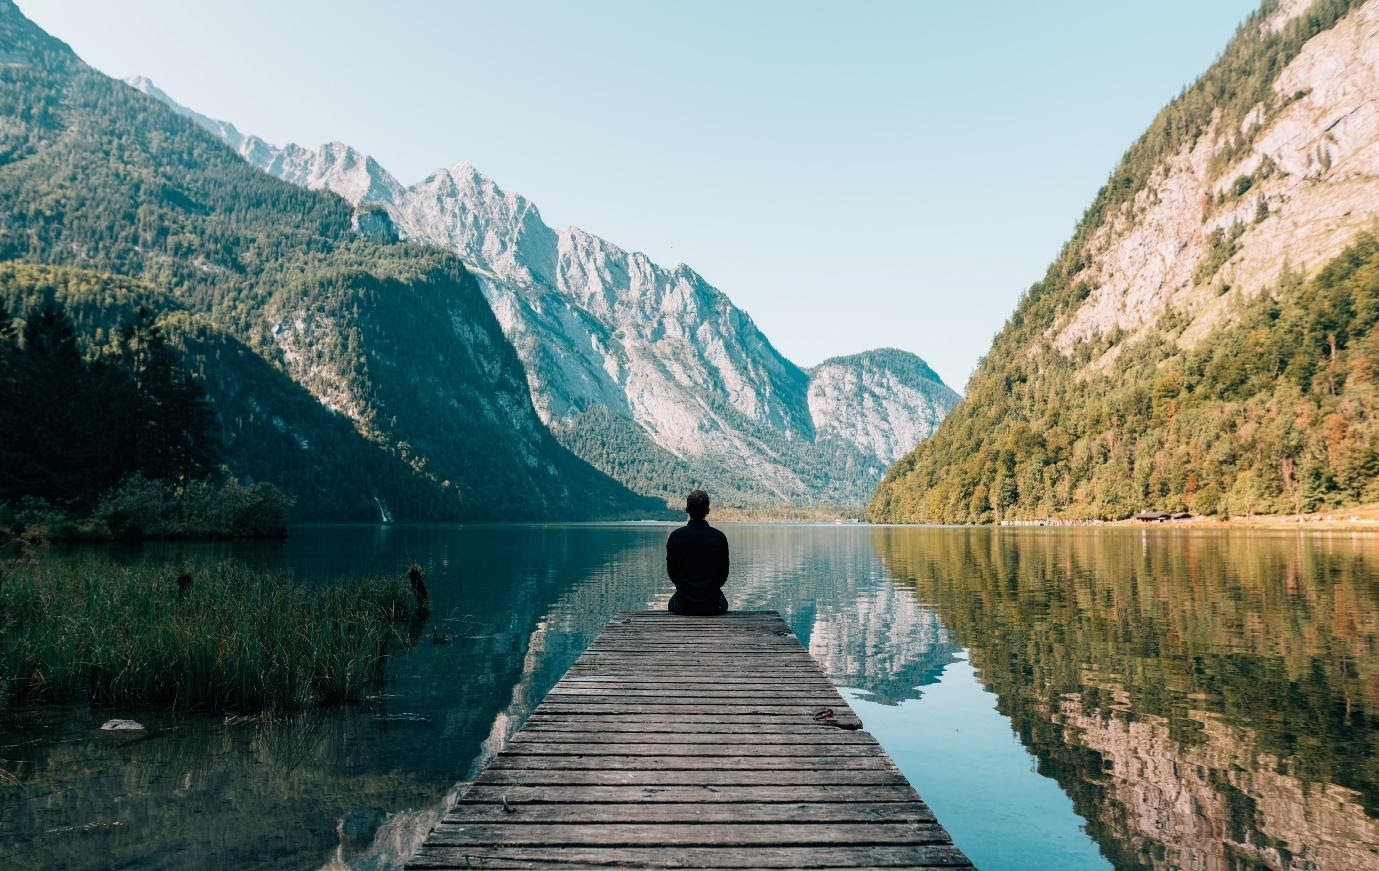 Man sitting on the edge of a dock overlooking a river and mountains.